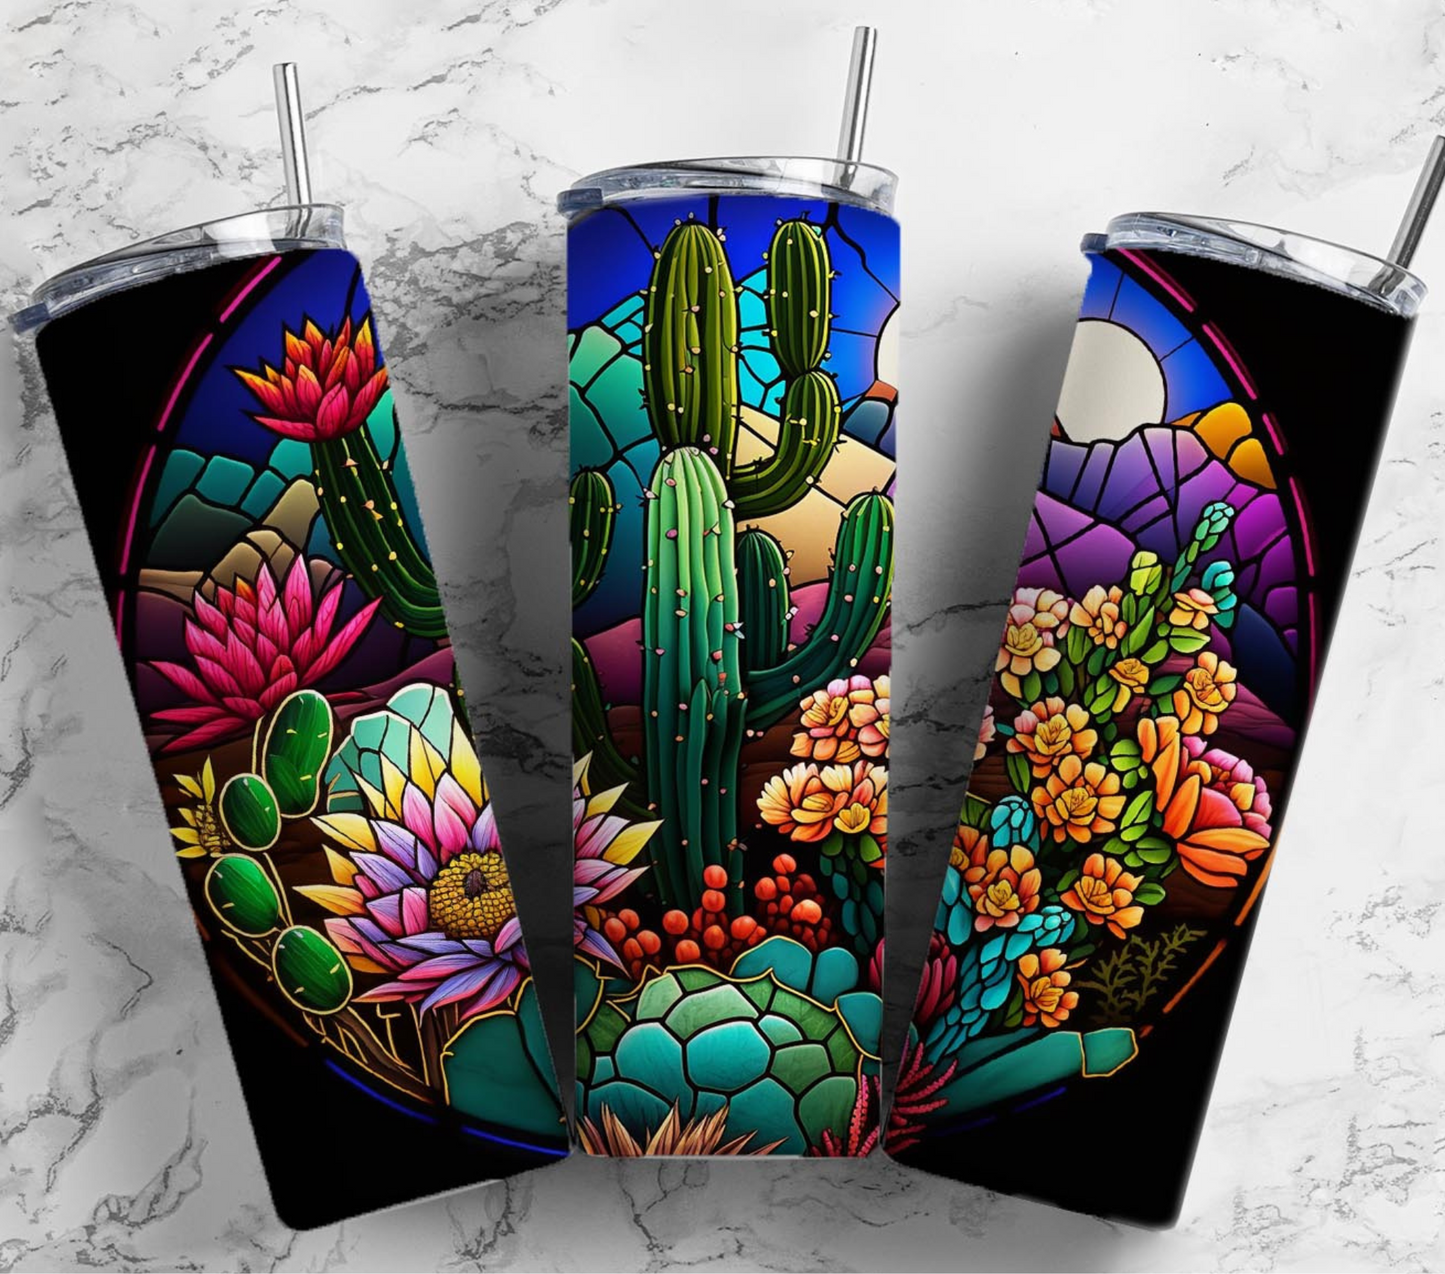 Stained Glass Adhesive Vinyl Wraps - 30 Design Options